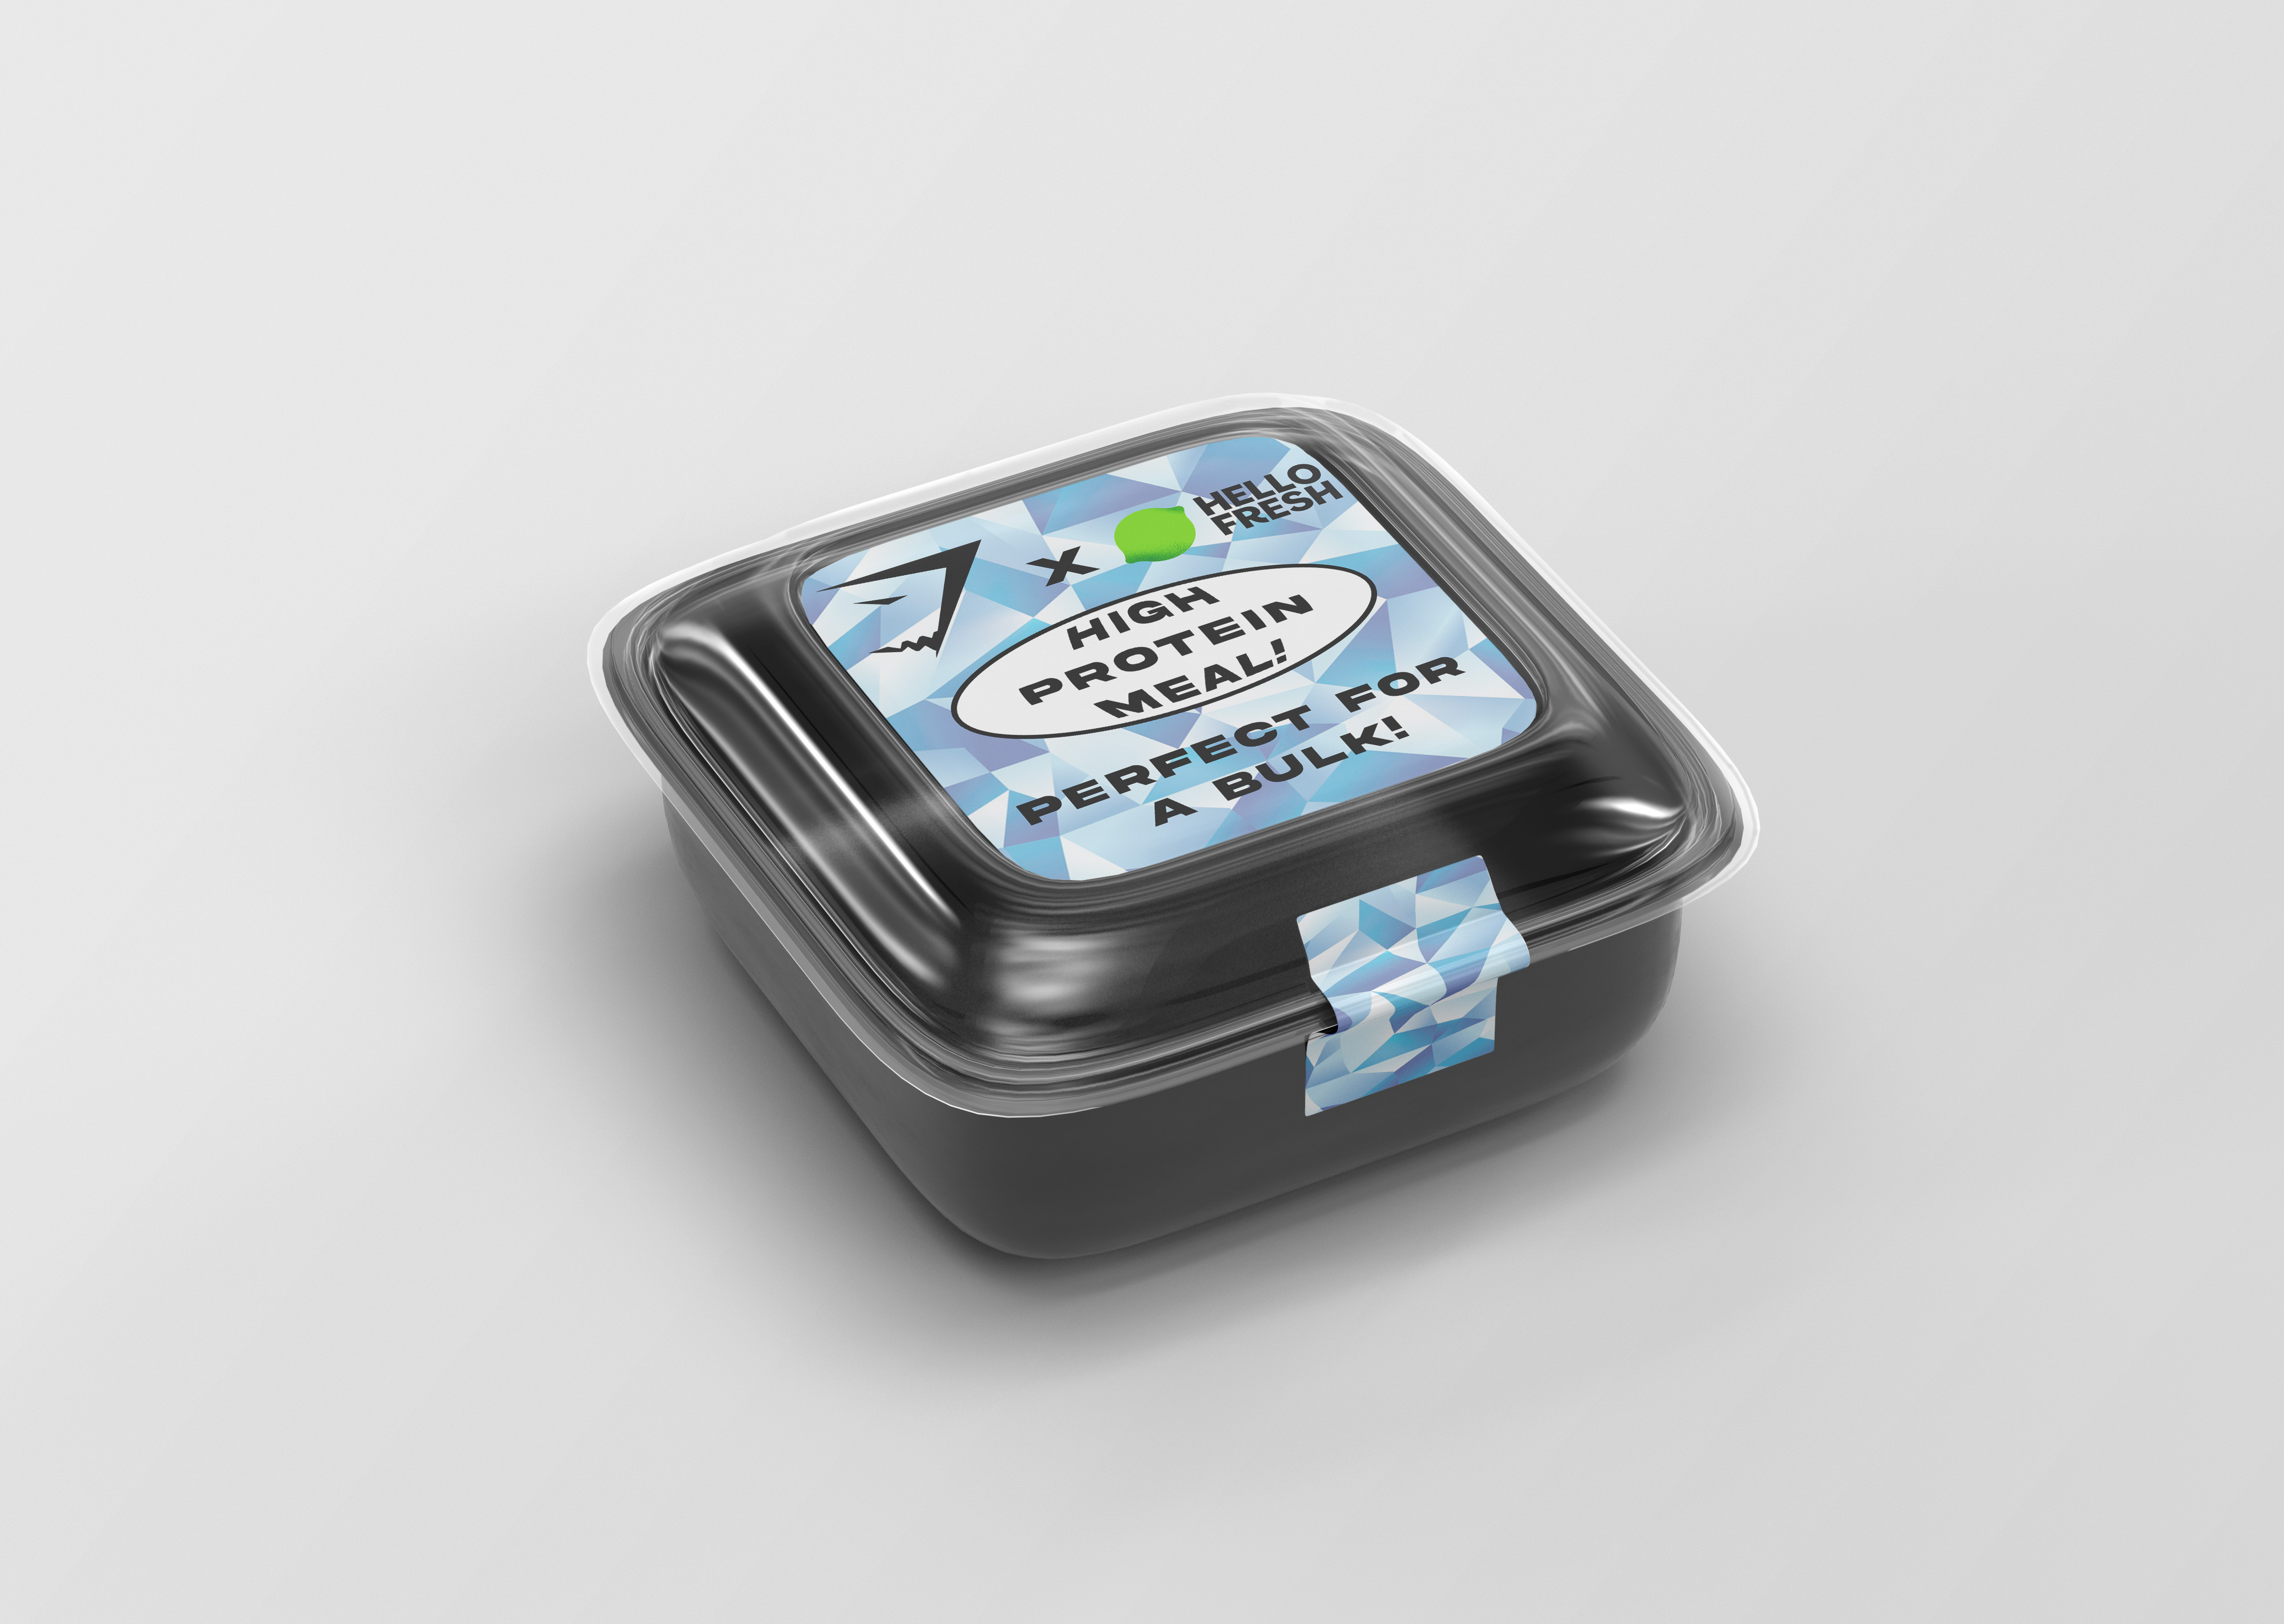 Mocked up packaging design for a collaboration between Gym Shark and Hello Fresh, the plastic tub has a light blue label on the lid and is sealed with a light blue sticker